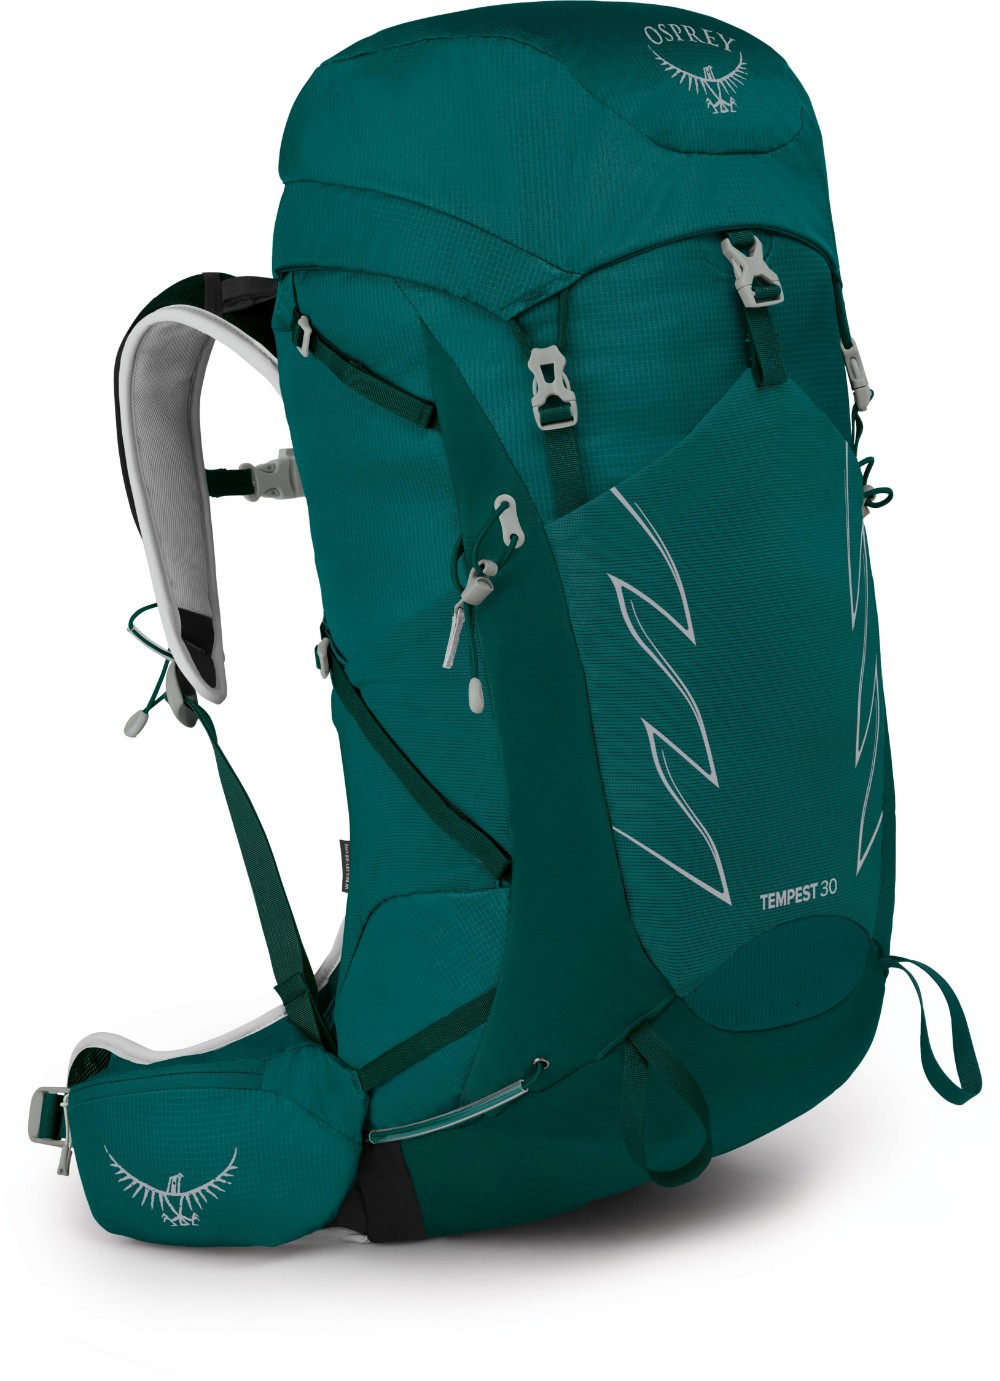 Tempest 30 Womens Hiking Backpack image 0